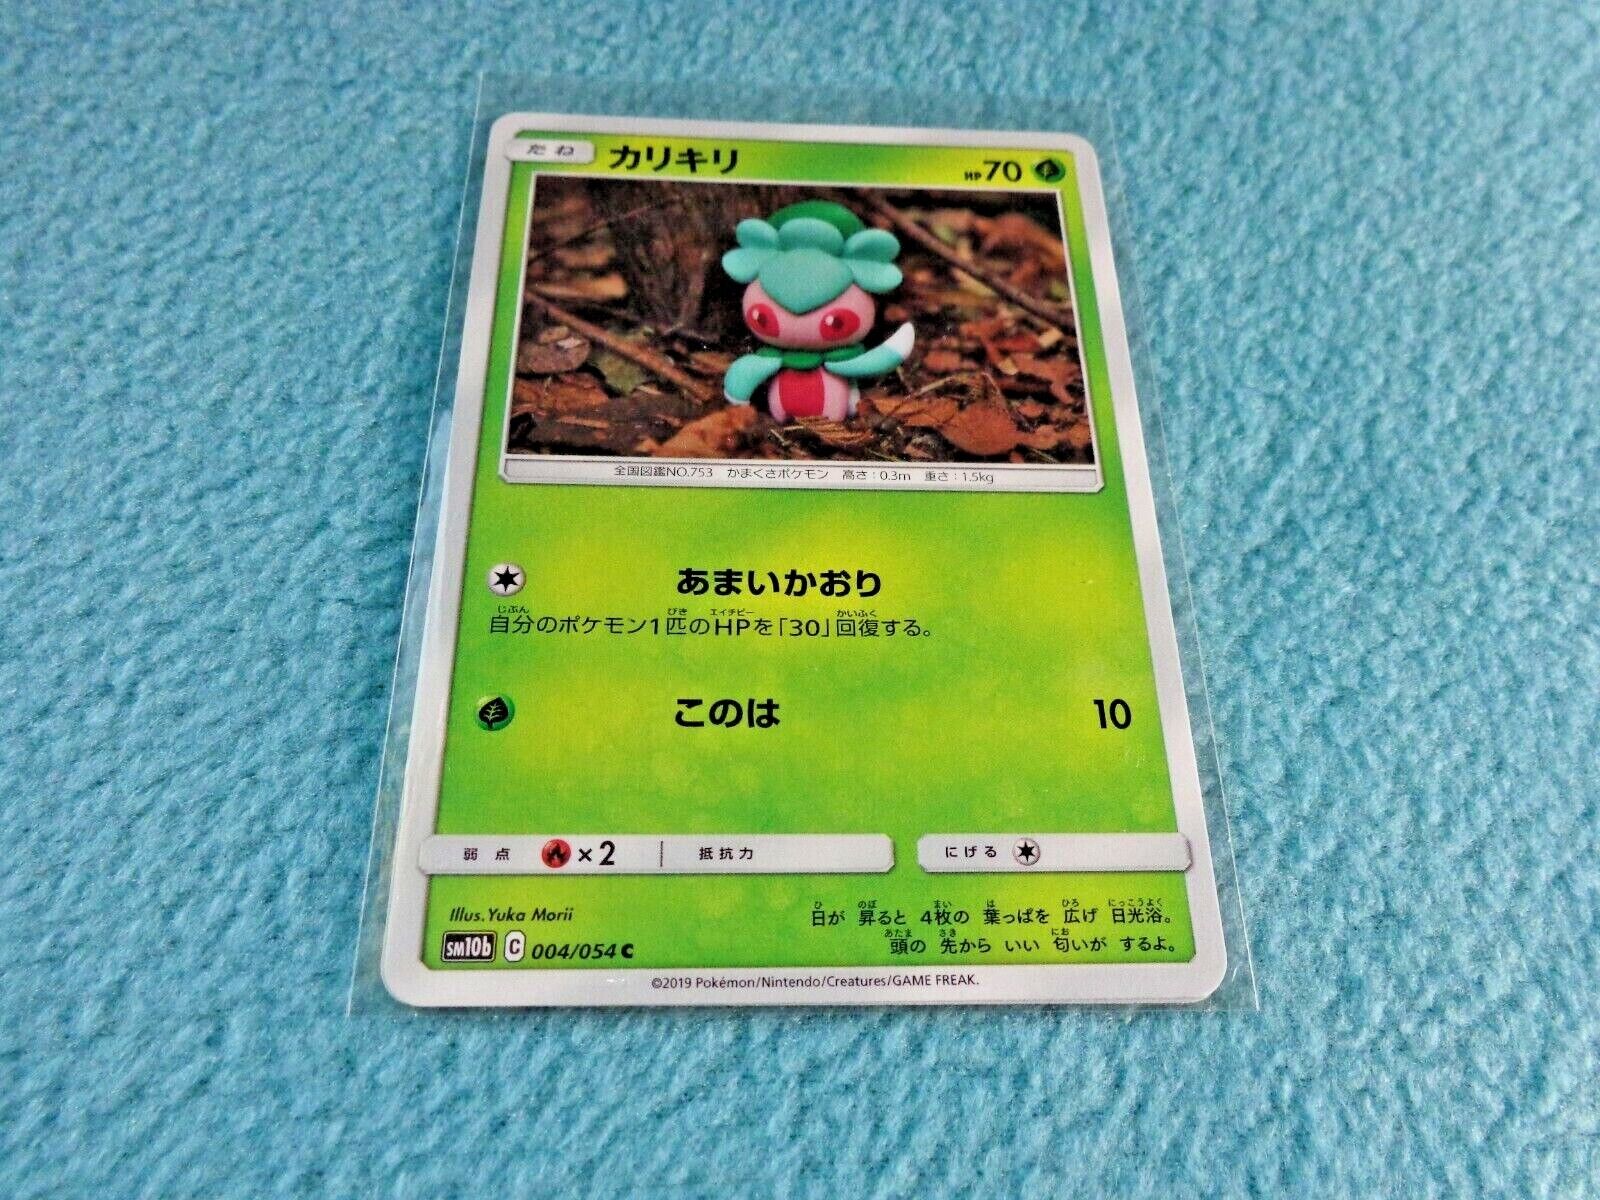 JAPANESE  POKEMON CARDS 2019  COMMON/UNCOMMON/HOLO/REV HOLO  ALL FRESH FROM PACK